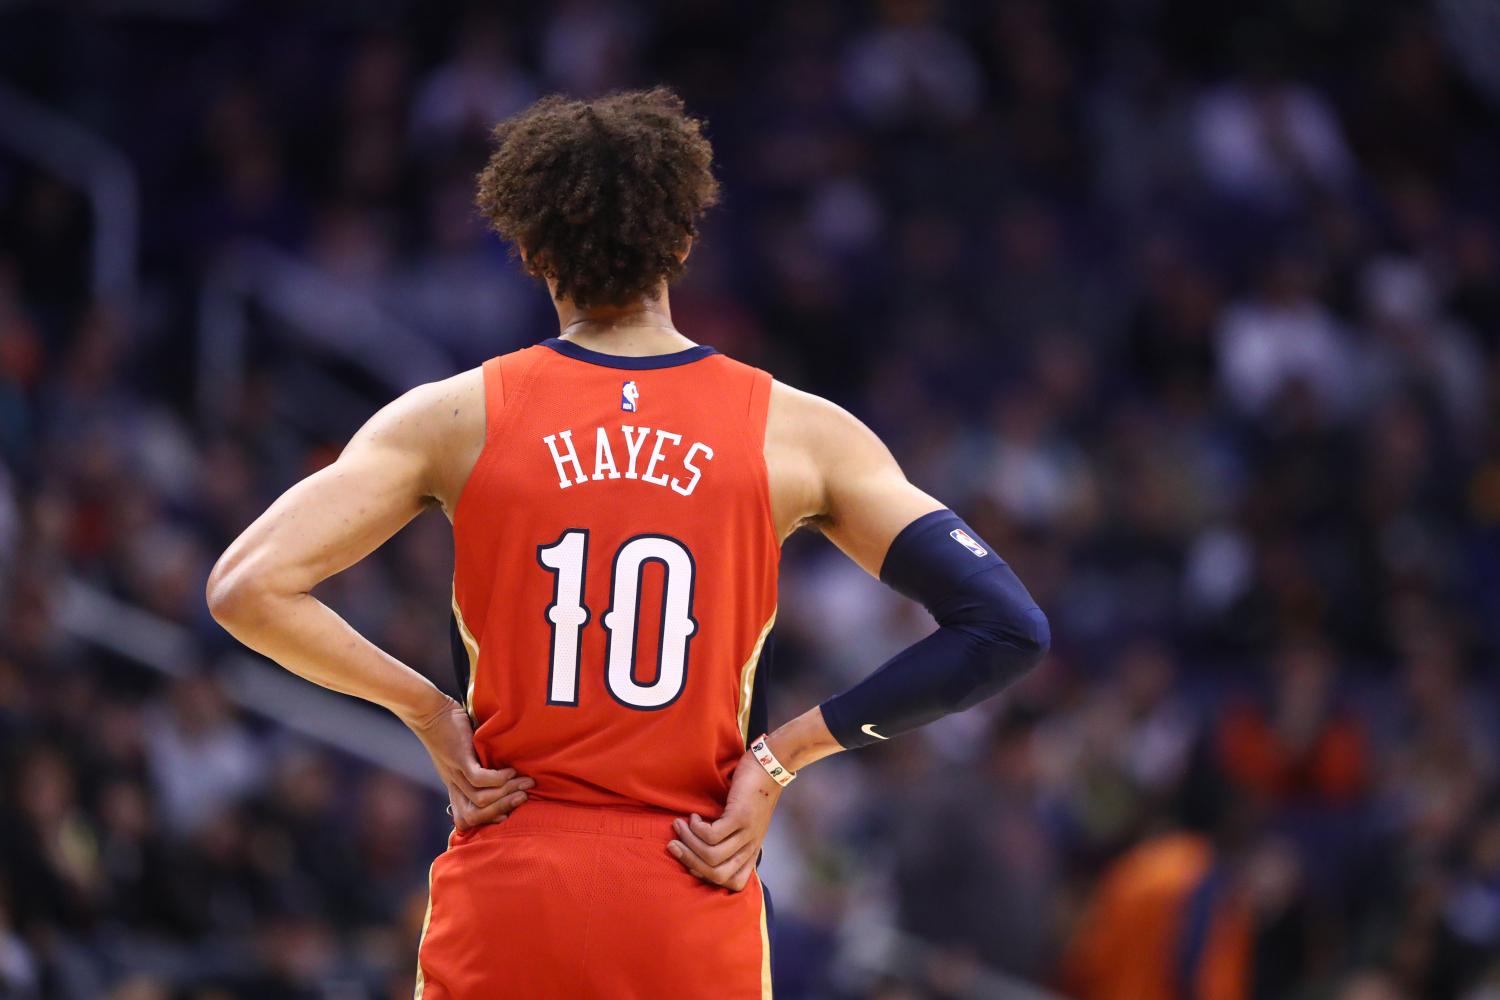 Nov 21, 2019; Phoenix, AZ, USA; Detailed view of the jersey of New Orleans Pelicans center Jaxson Hayes (10) against the Phoenix Suns at Talking Stick Resort Arena. Mandatory Credit: Mark J. Rebilas-USA TODAY Sports